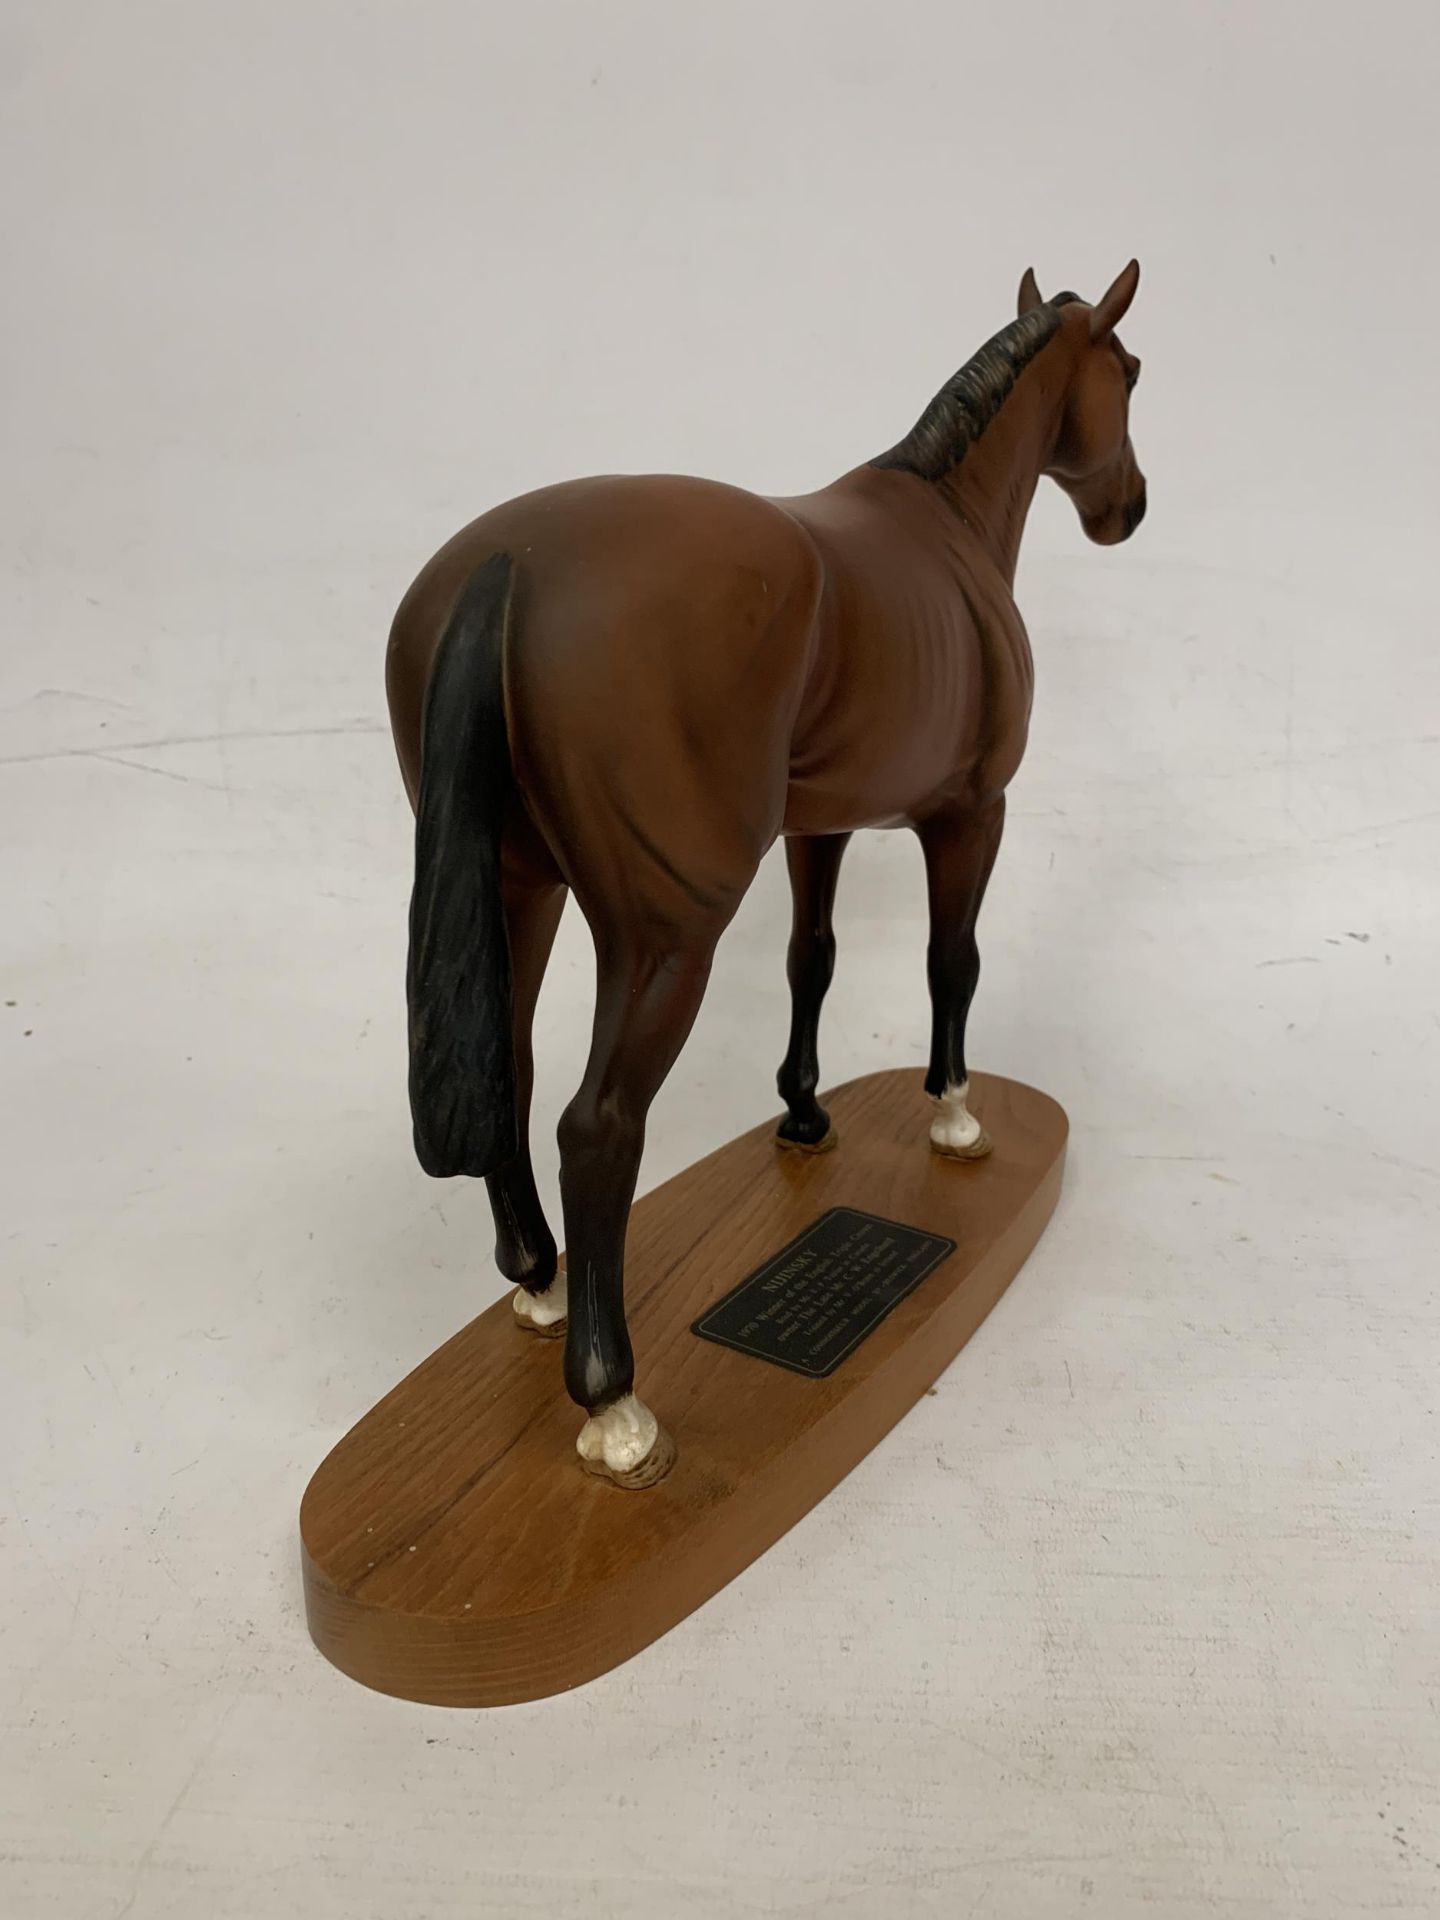 A BESWICK "NIJINSKY" HORSE FIGURINE FROM THE CONNOISSEUR HORSES SERIES WINNER OF THE TRIPLE CROWN - Image 3 of 5